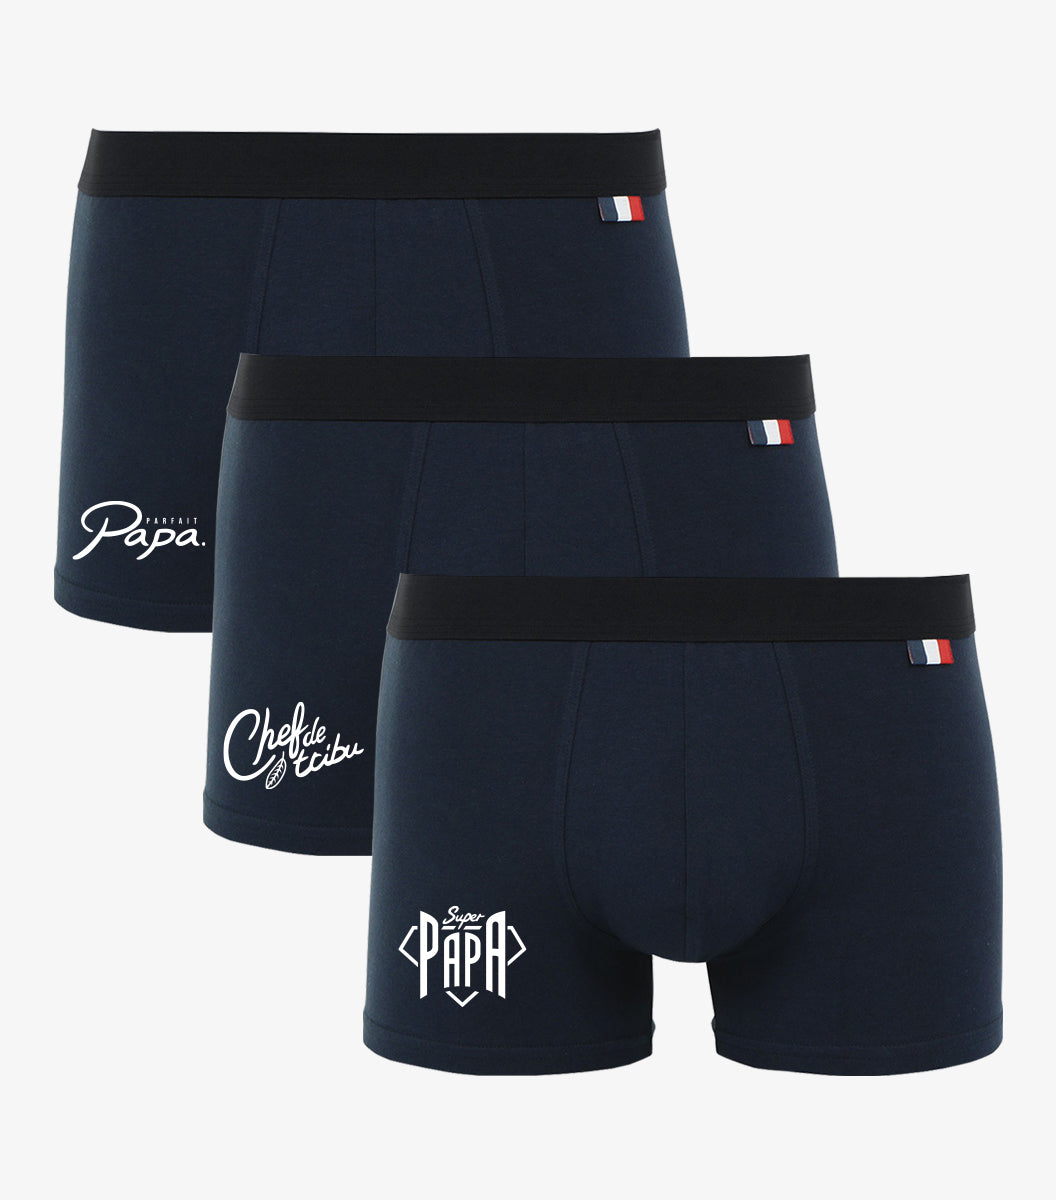 Boxer Homme Marine - Pack Papa